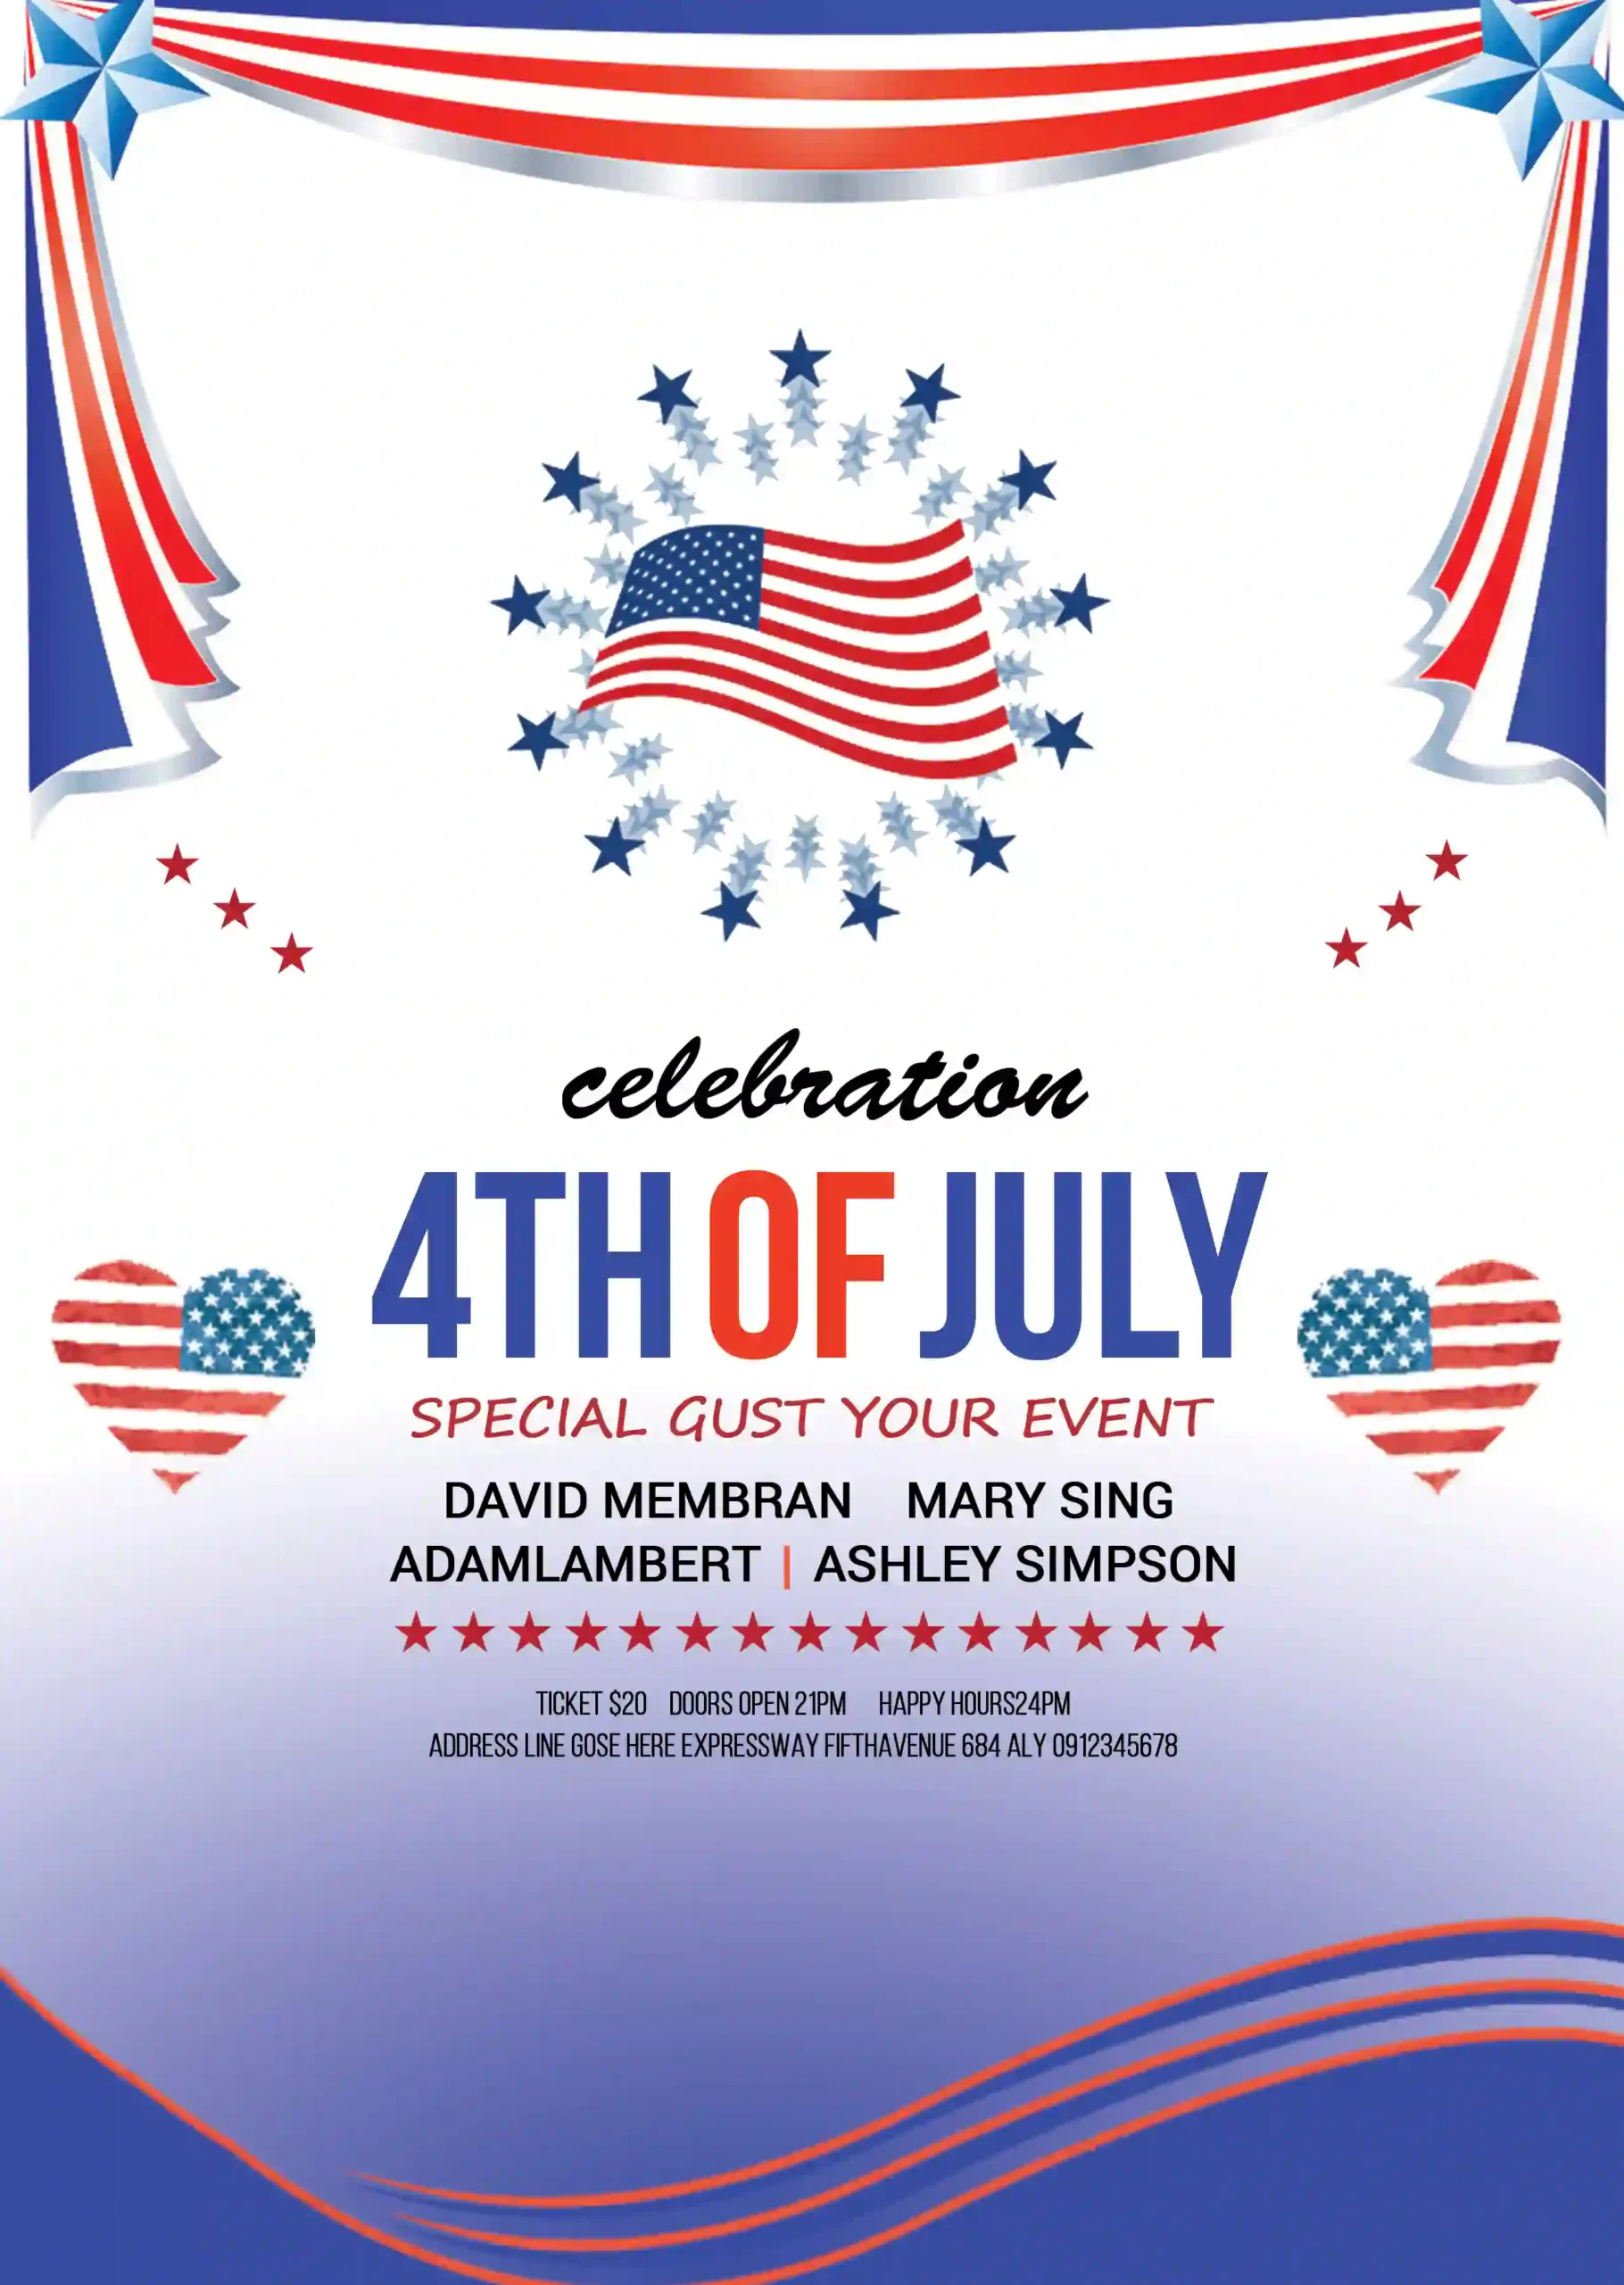 American Day 4th July Flyer PSD Free Download